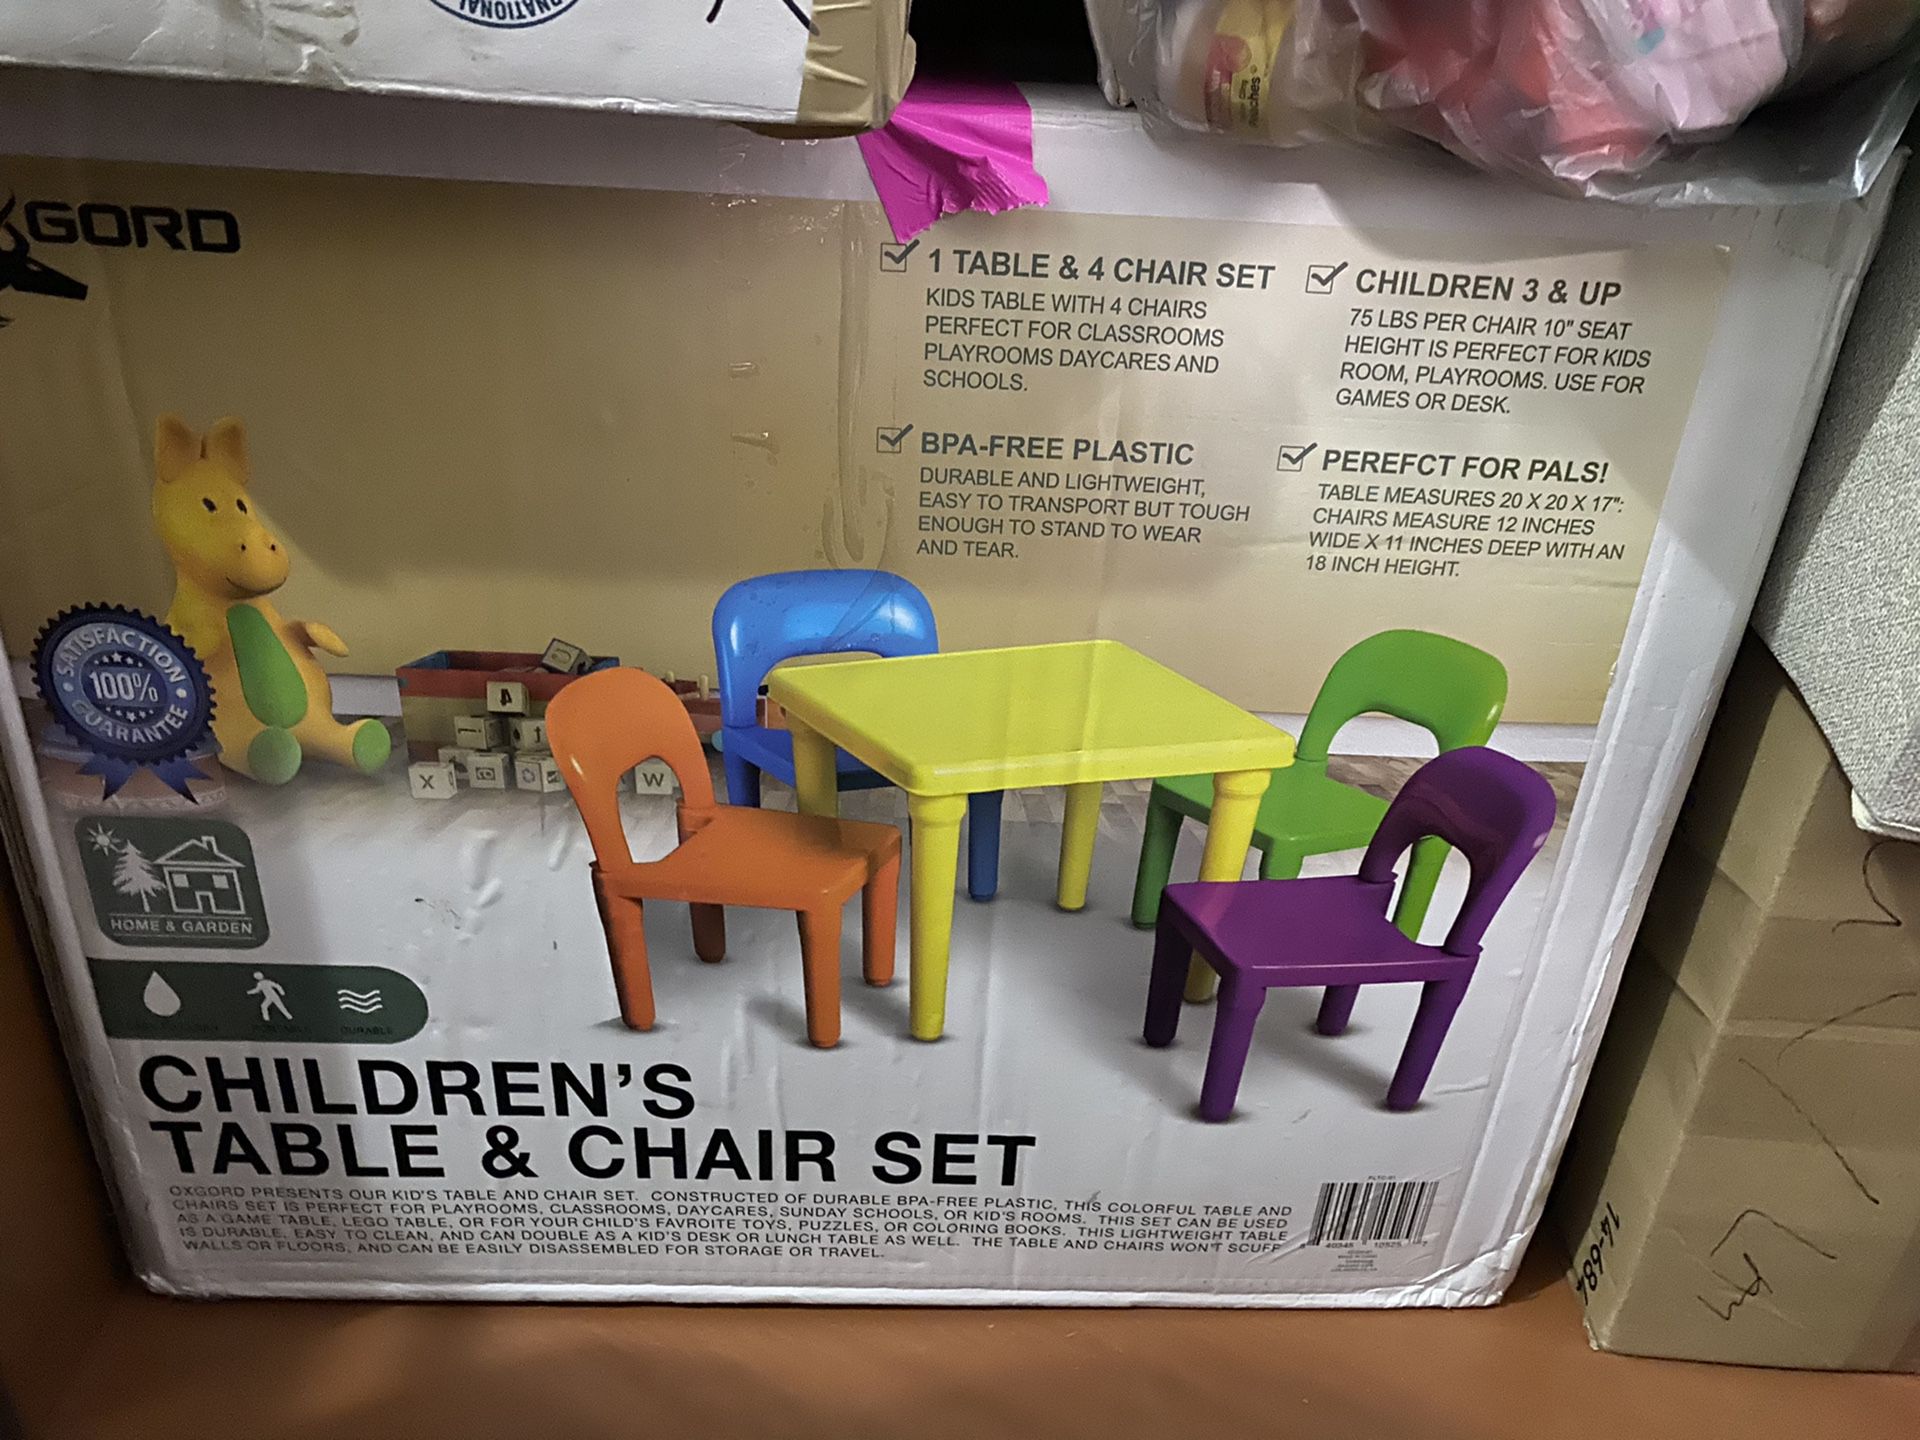 Children’s table and chair set